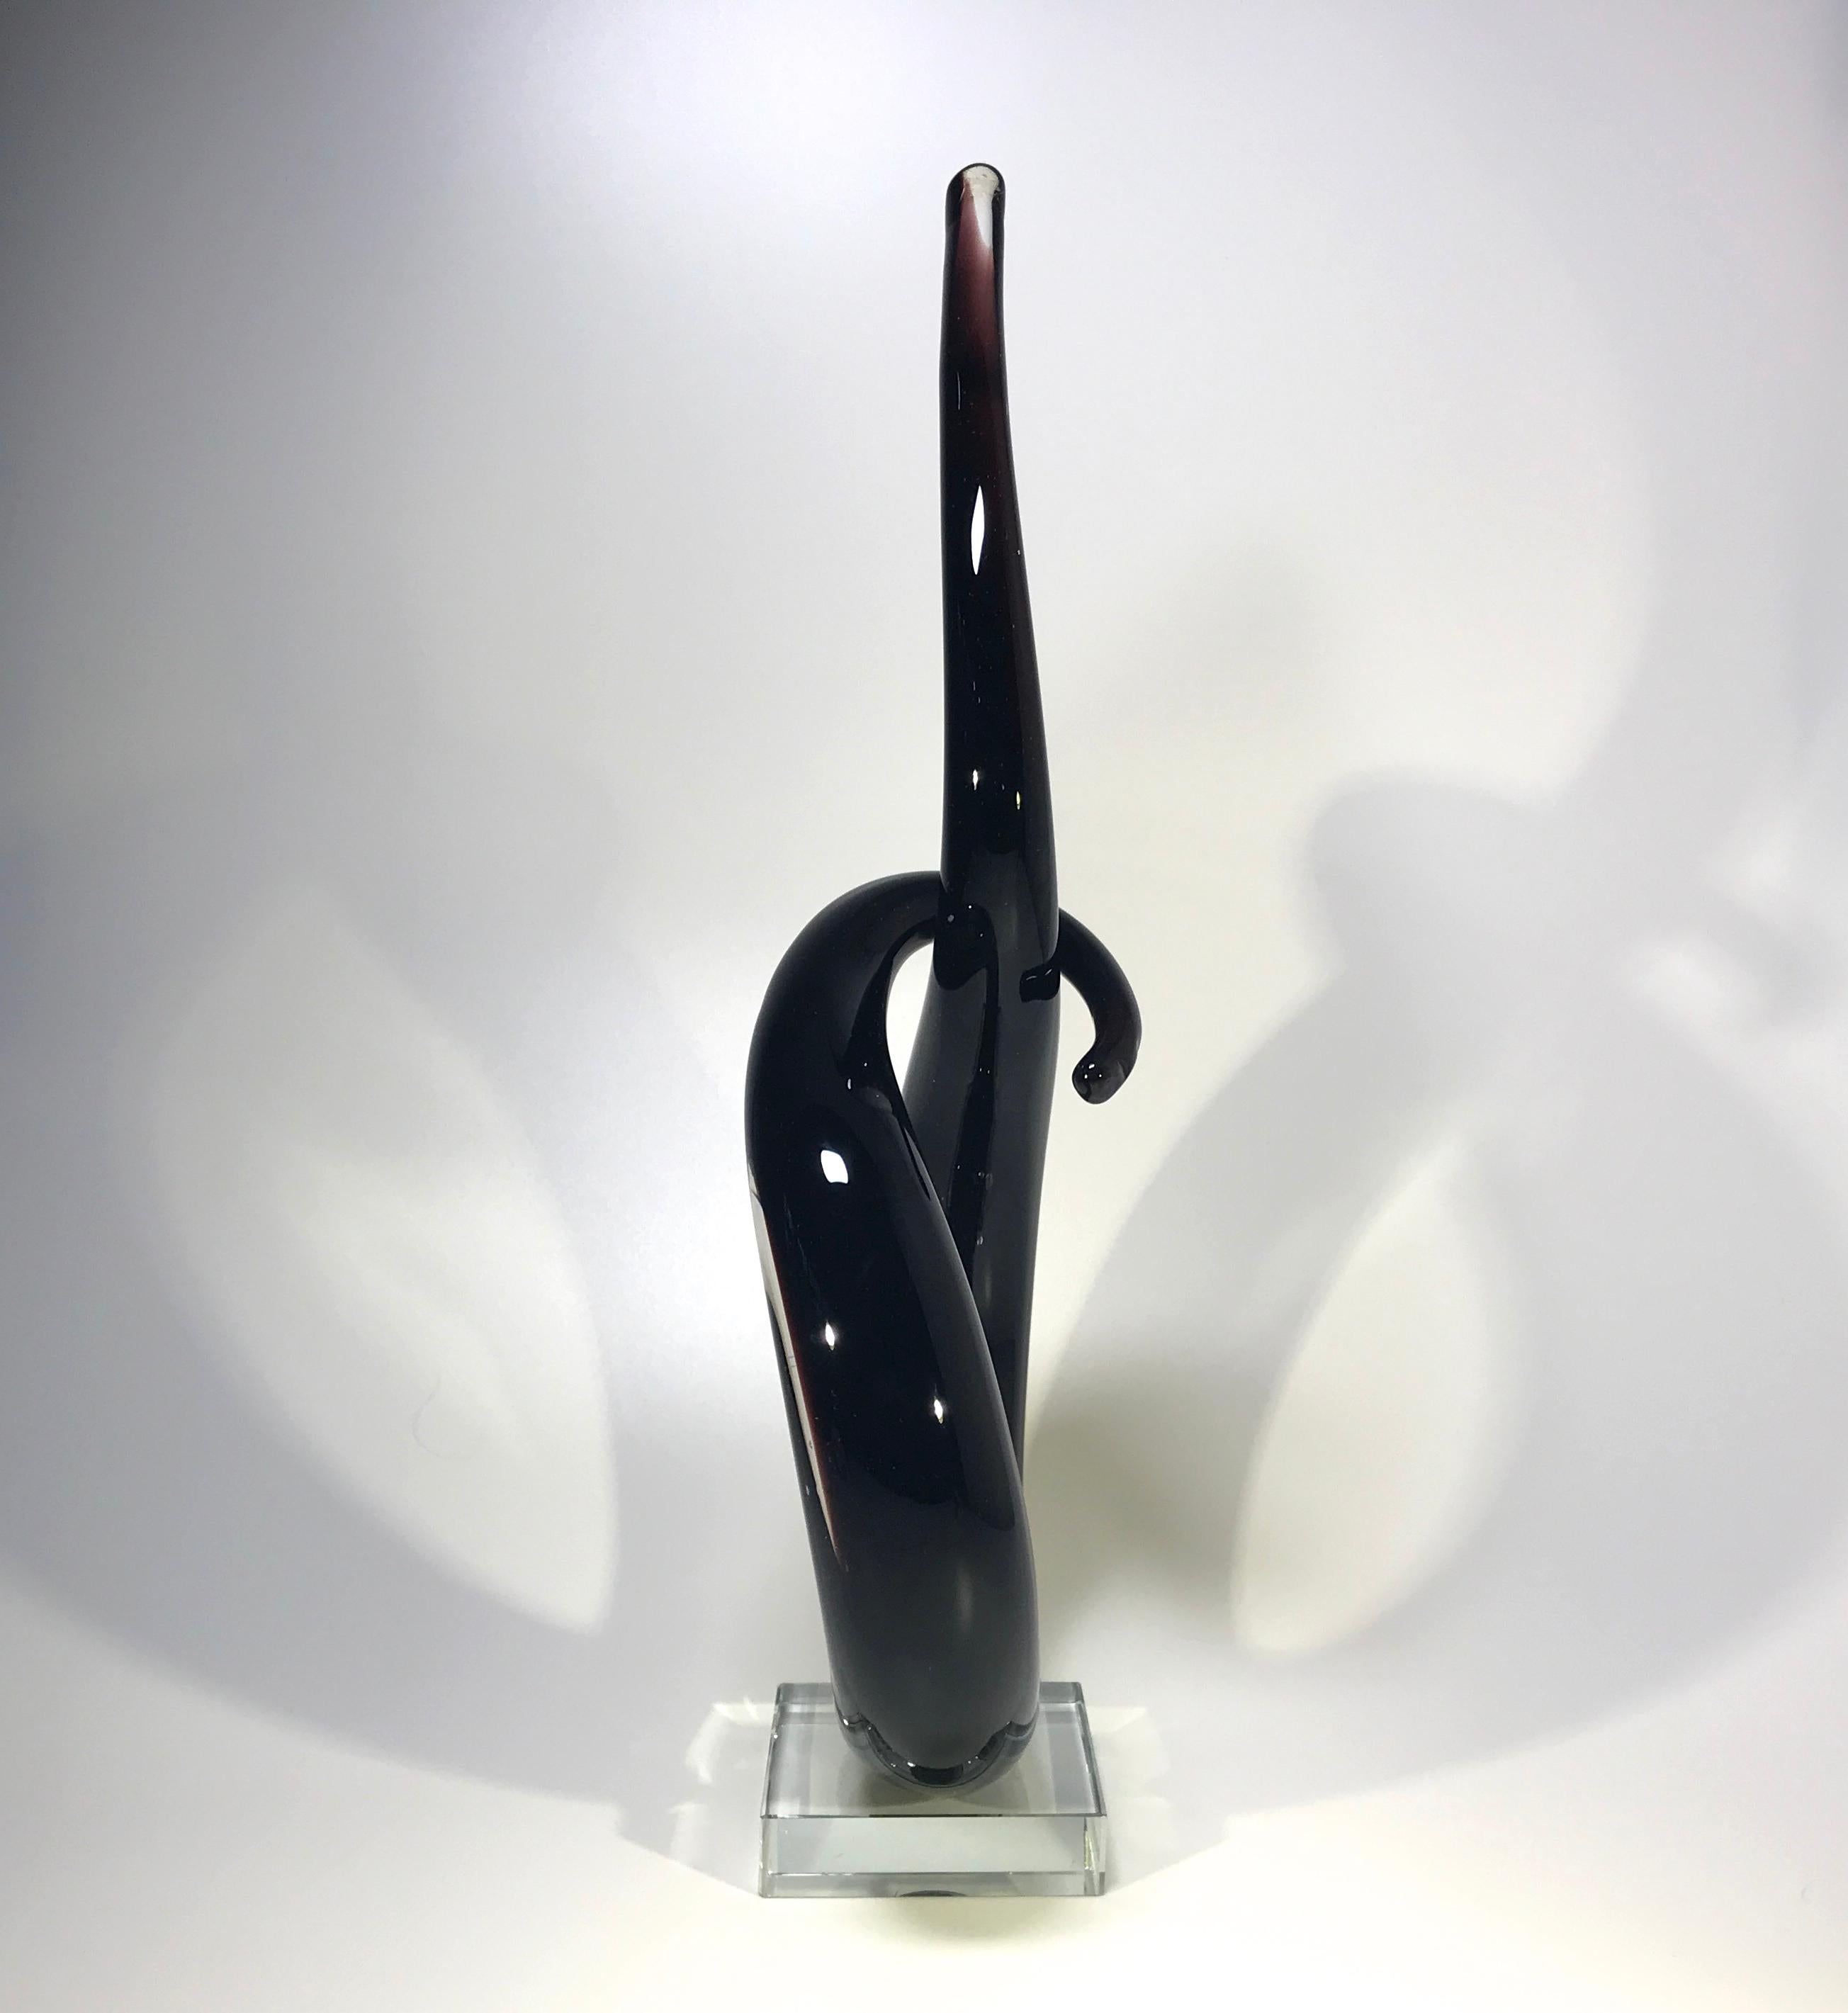 Abstract oxblood black Murano of Italy, sculpture from the 1960s
A fabulous piece of entwined Murano
Stands on a clear square plinth
circa 1960s
Measures: Height 15 inch, width 6.5 inch, depth 3 inch
Very good condition., very light scratches